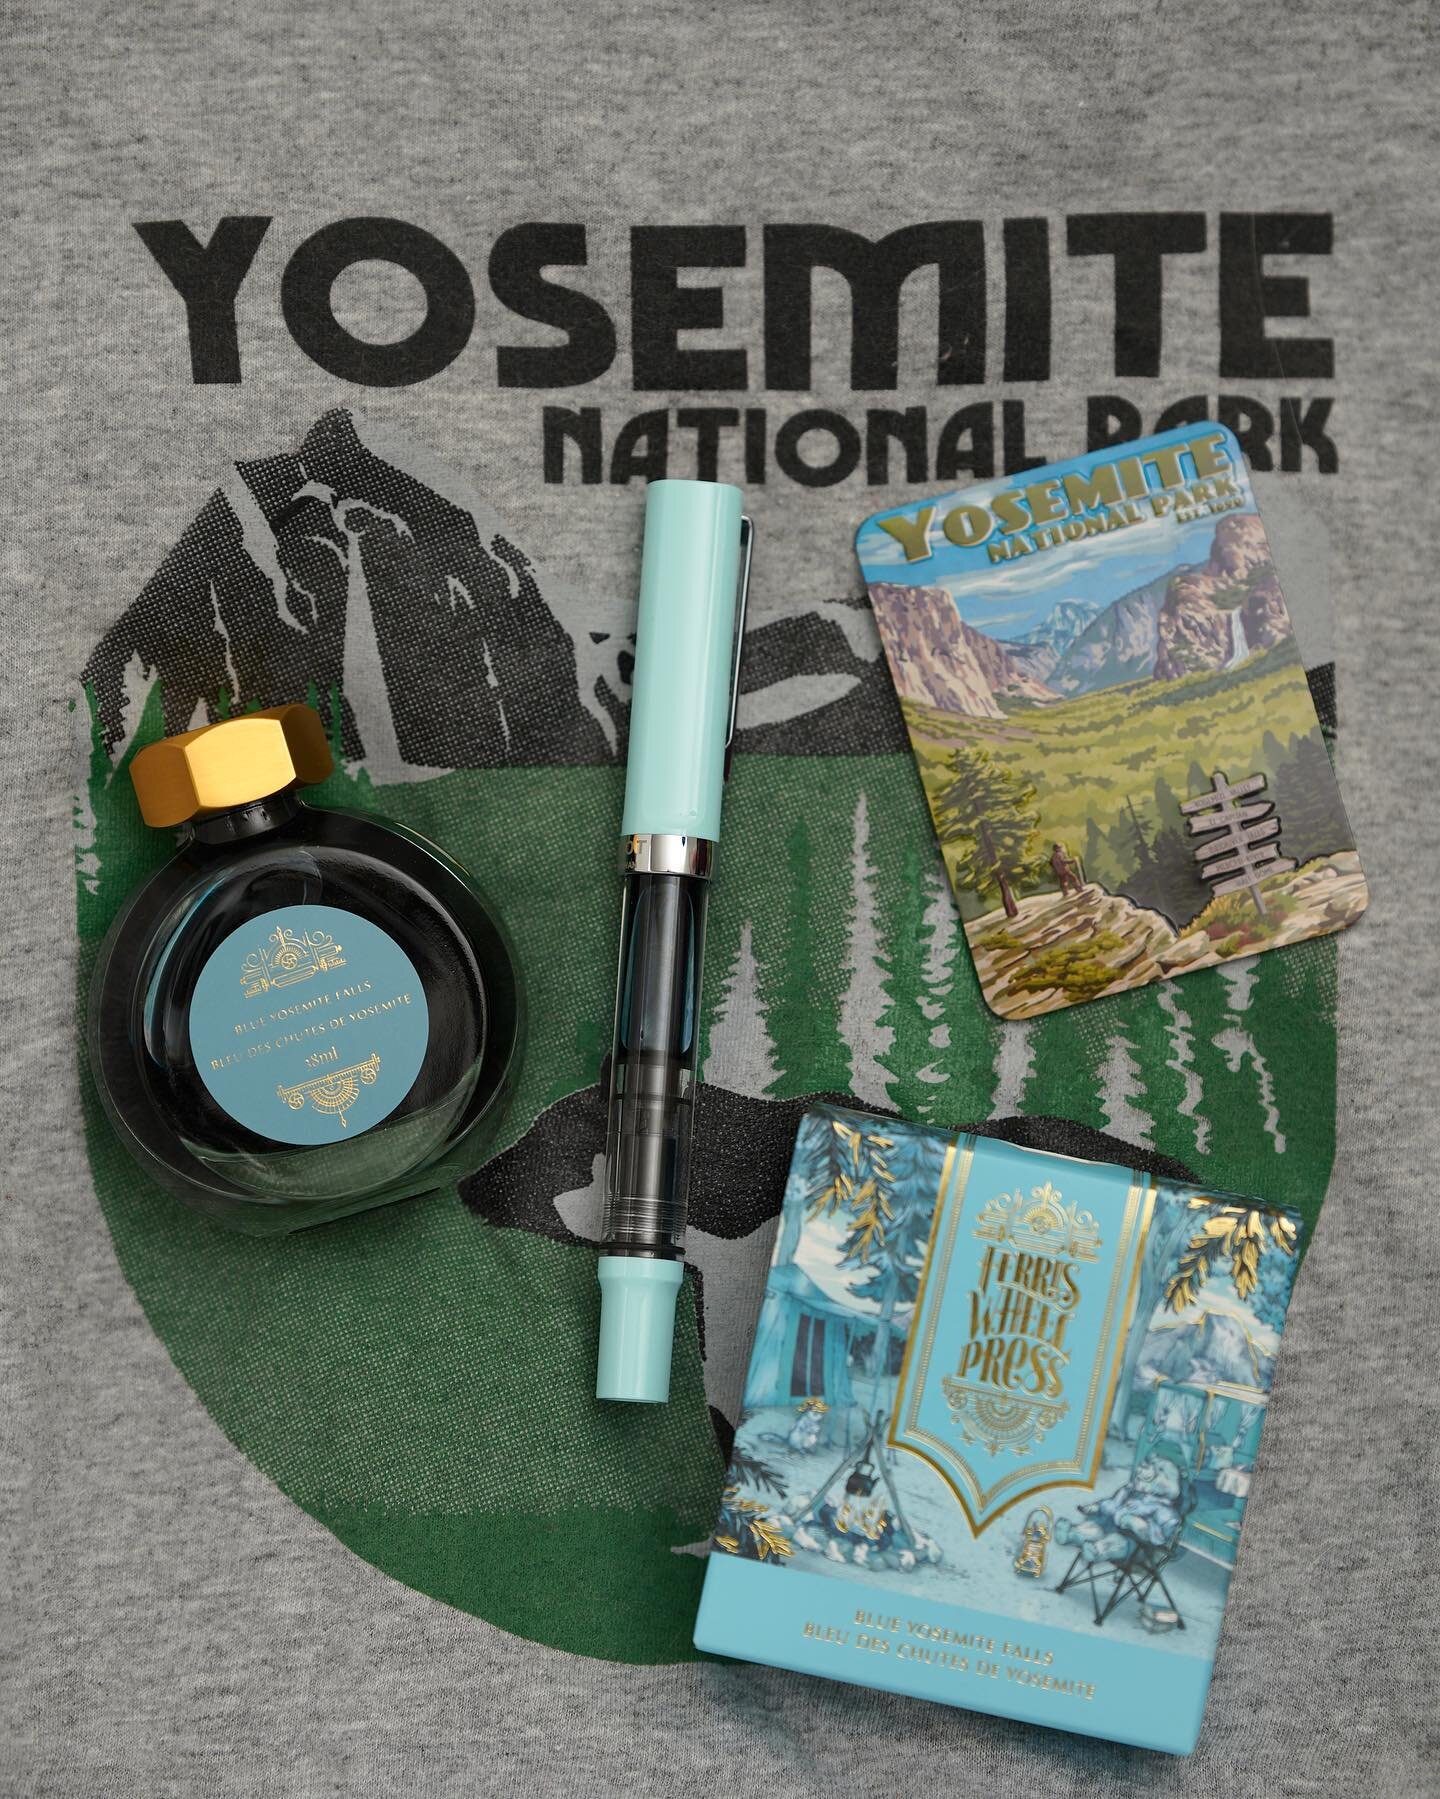 I literally did the road trip from Vancouver, Canada to Yosemite National Park and South California last year through US Route 101. It was an epic adventure. This @ferriswheelpress Blue Yosemite Falls ink makes the best belated souvenir in memory of 